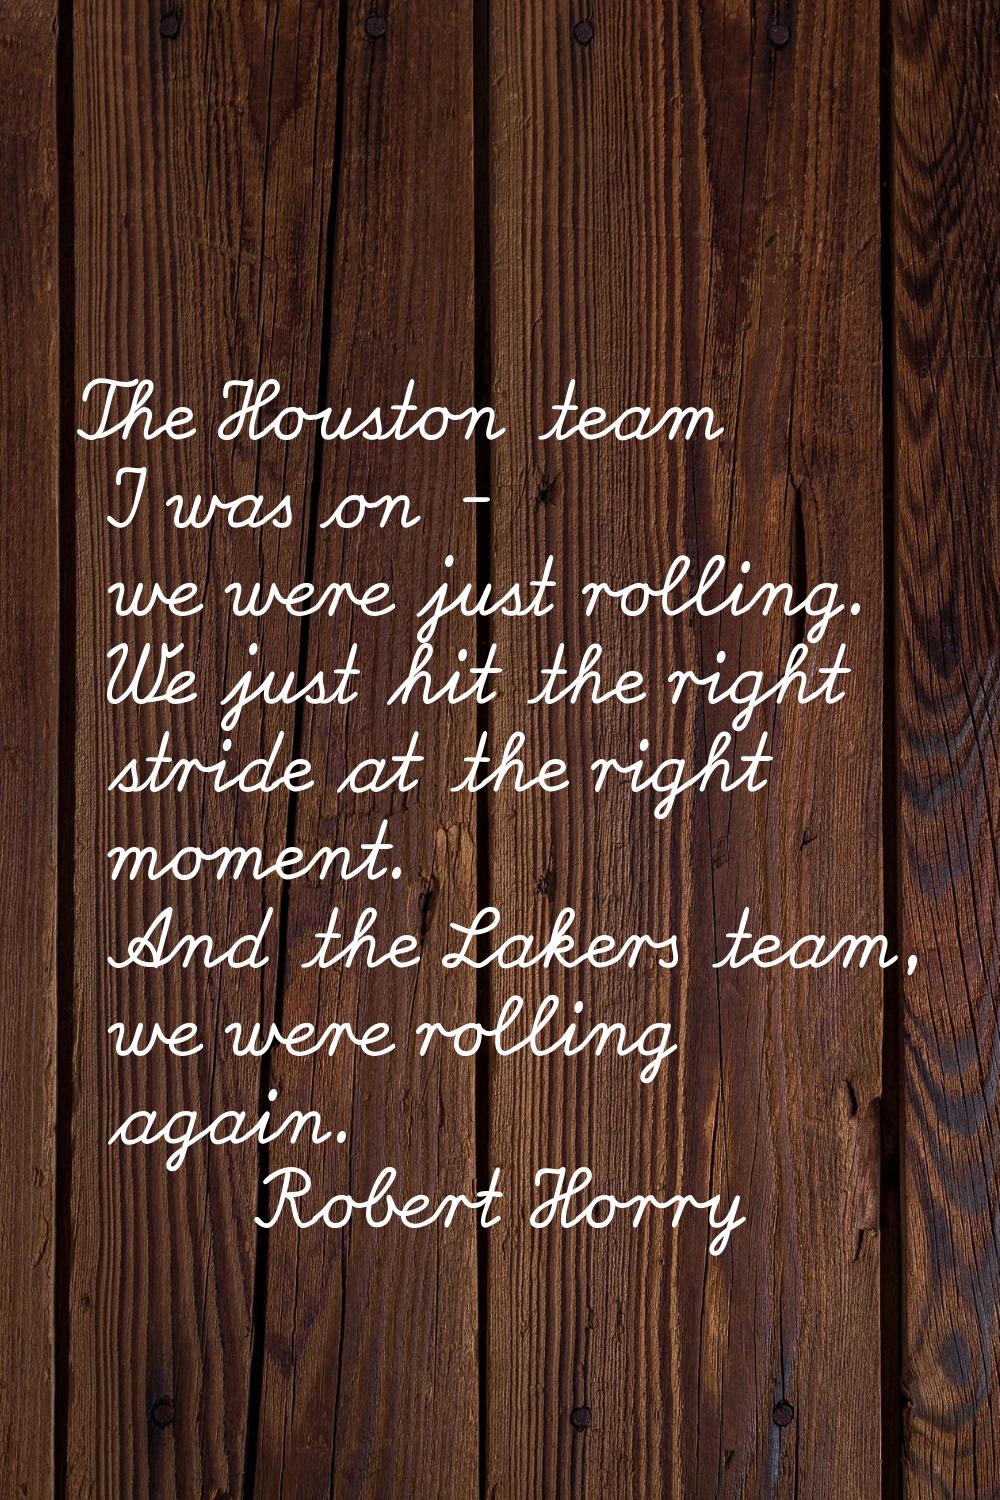 The Houston team I was on - we were just rolling. We just hit the right stride at the right moment.